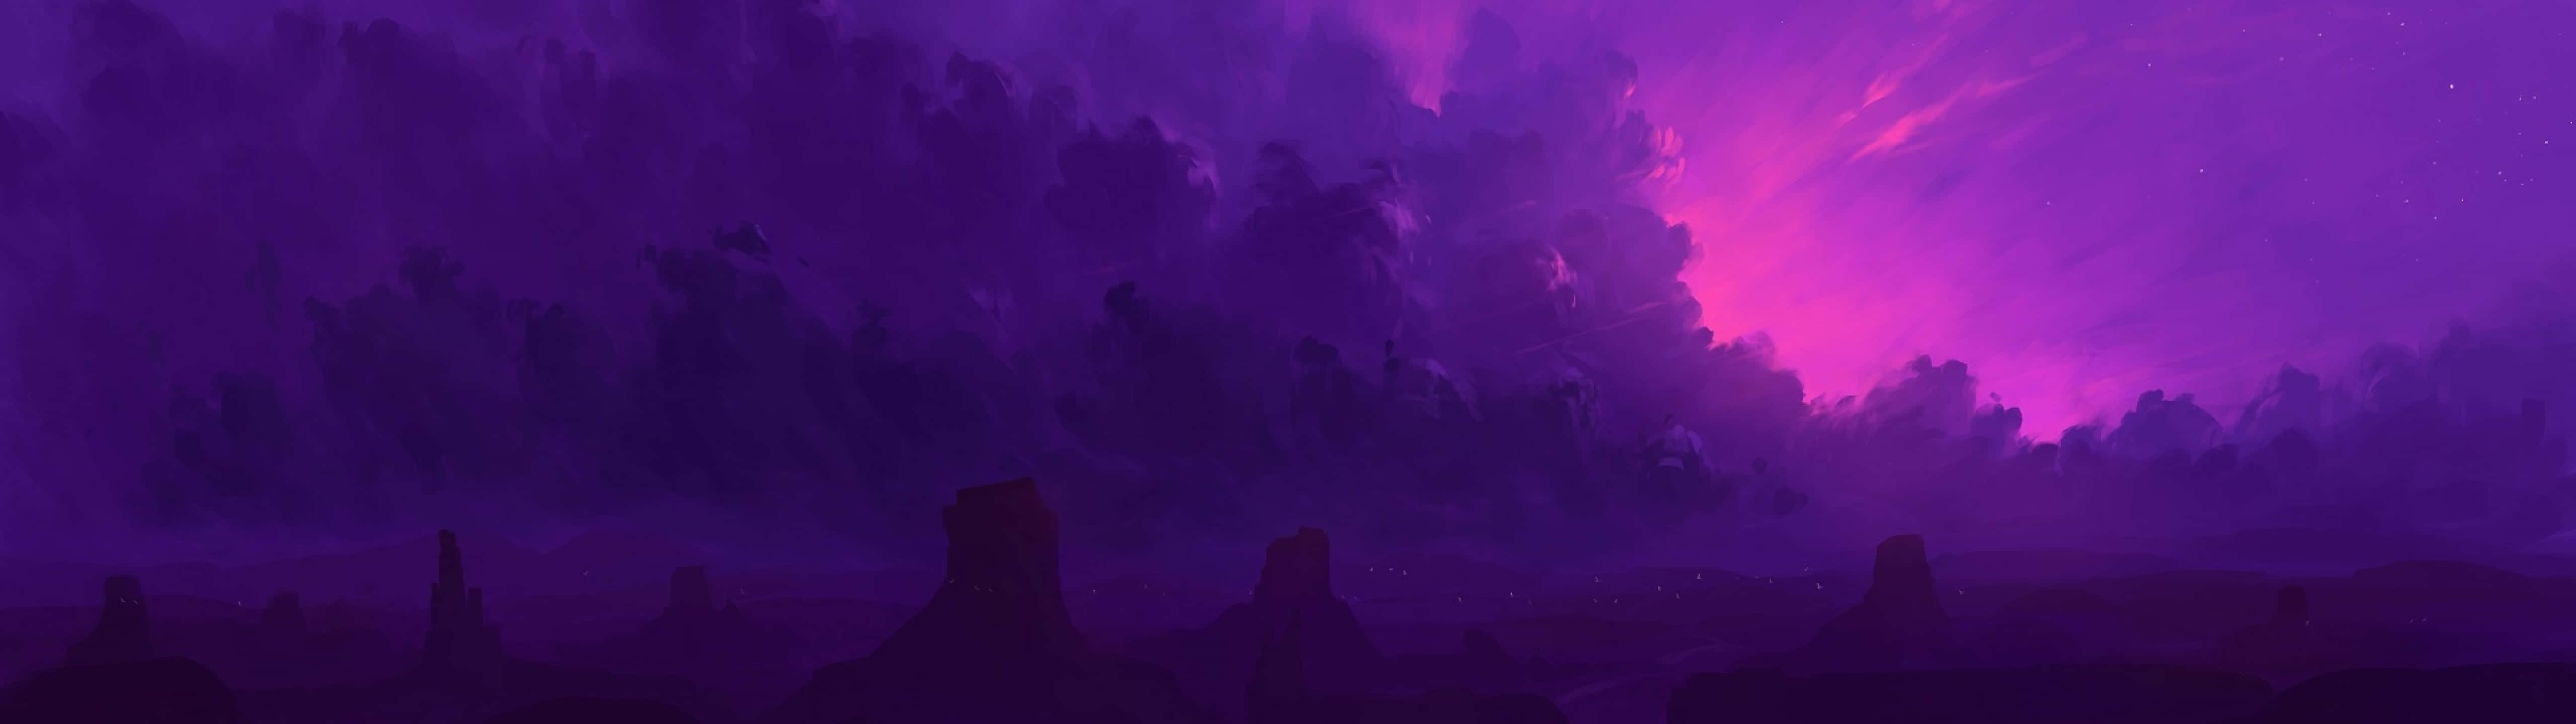 A Purple Landscape With Mountains And Trees Wallpaper